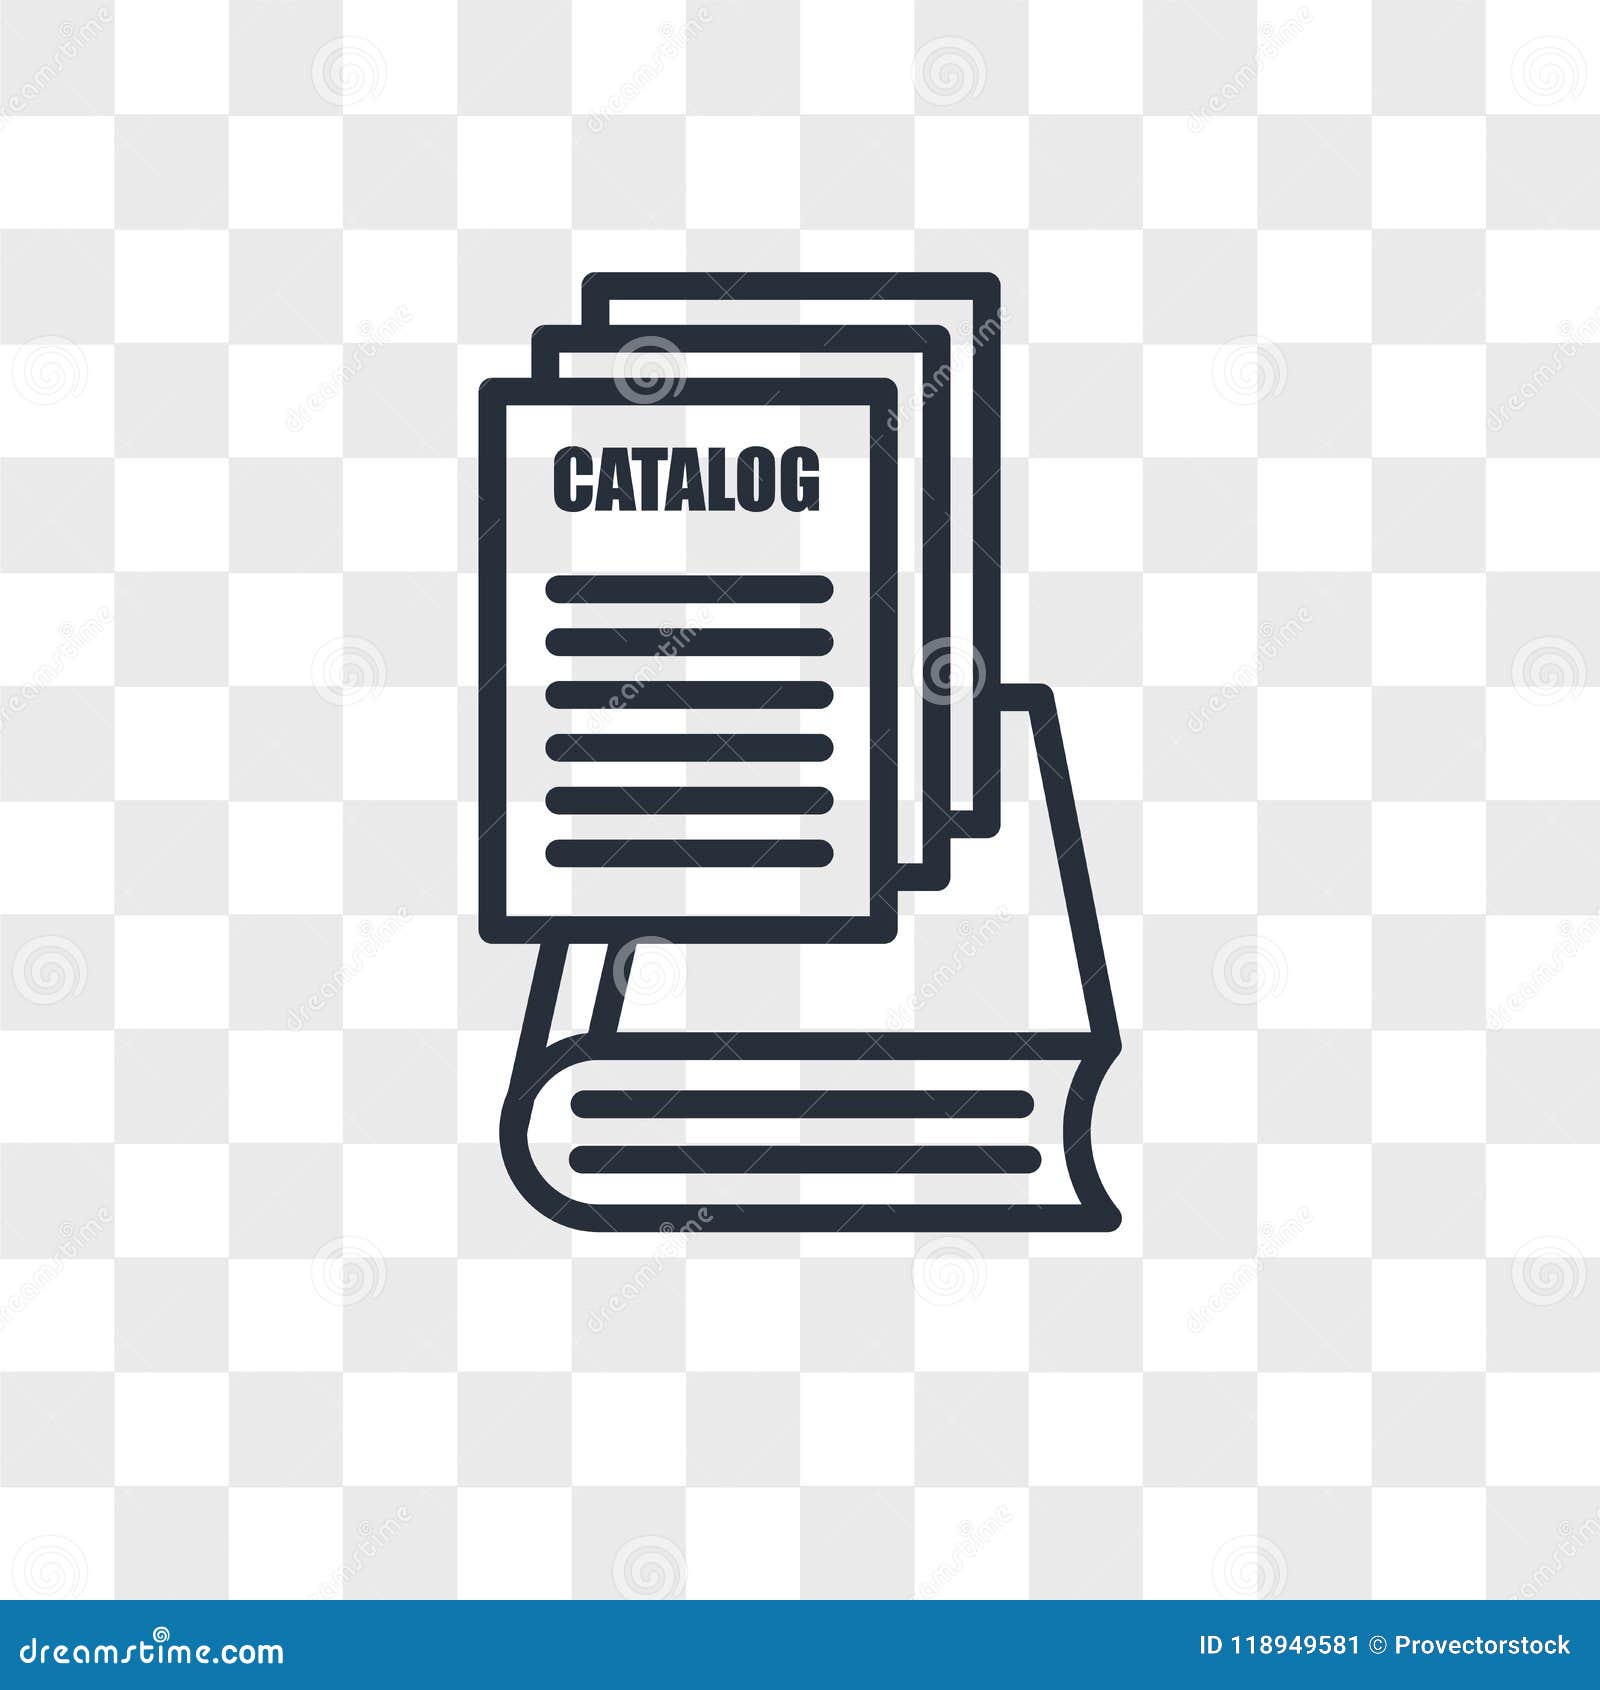 service catalog vector icon isolated on transparent background